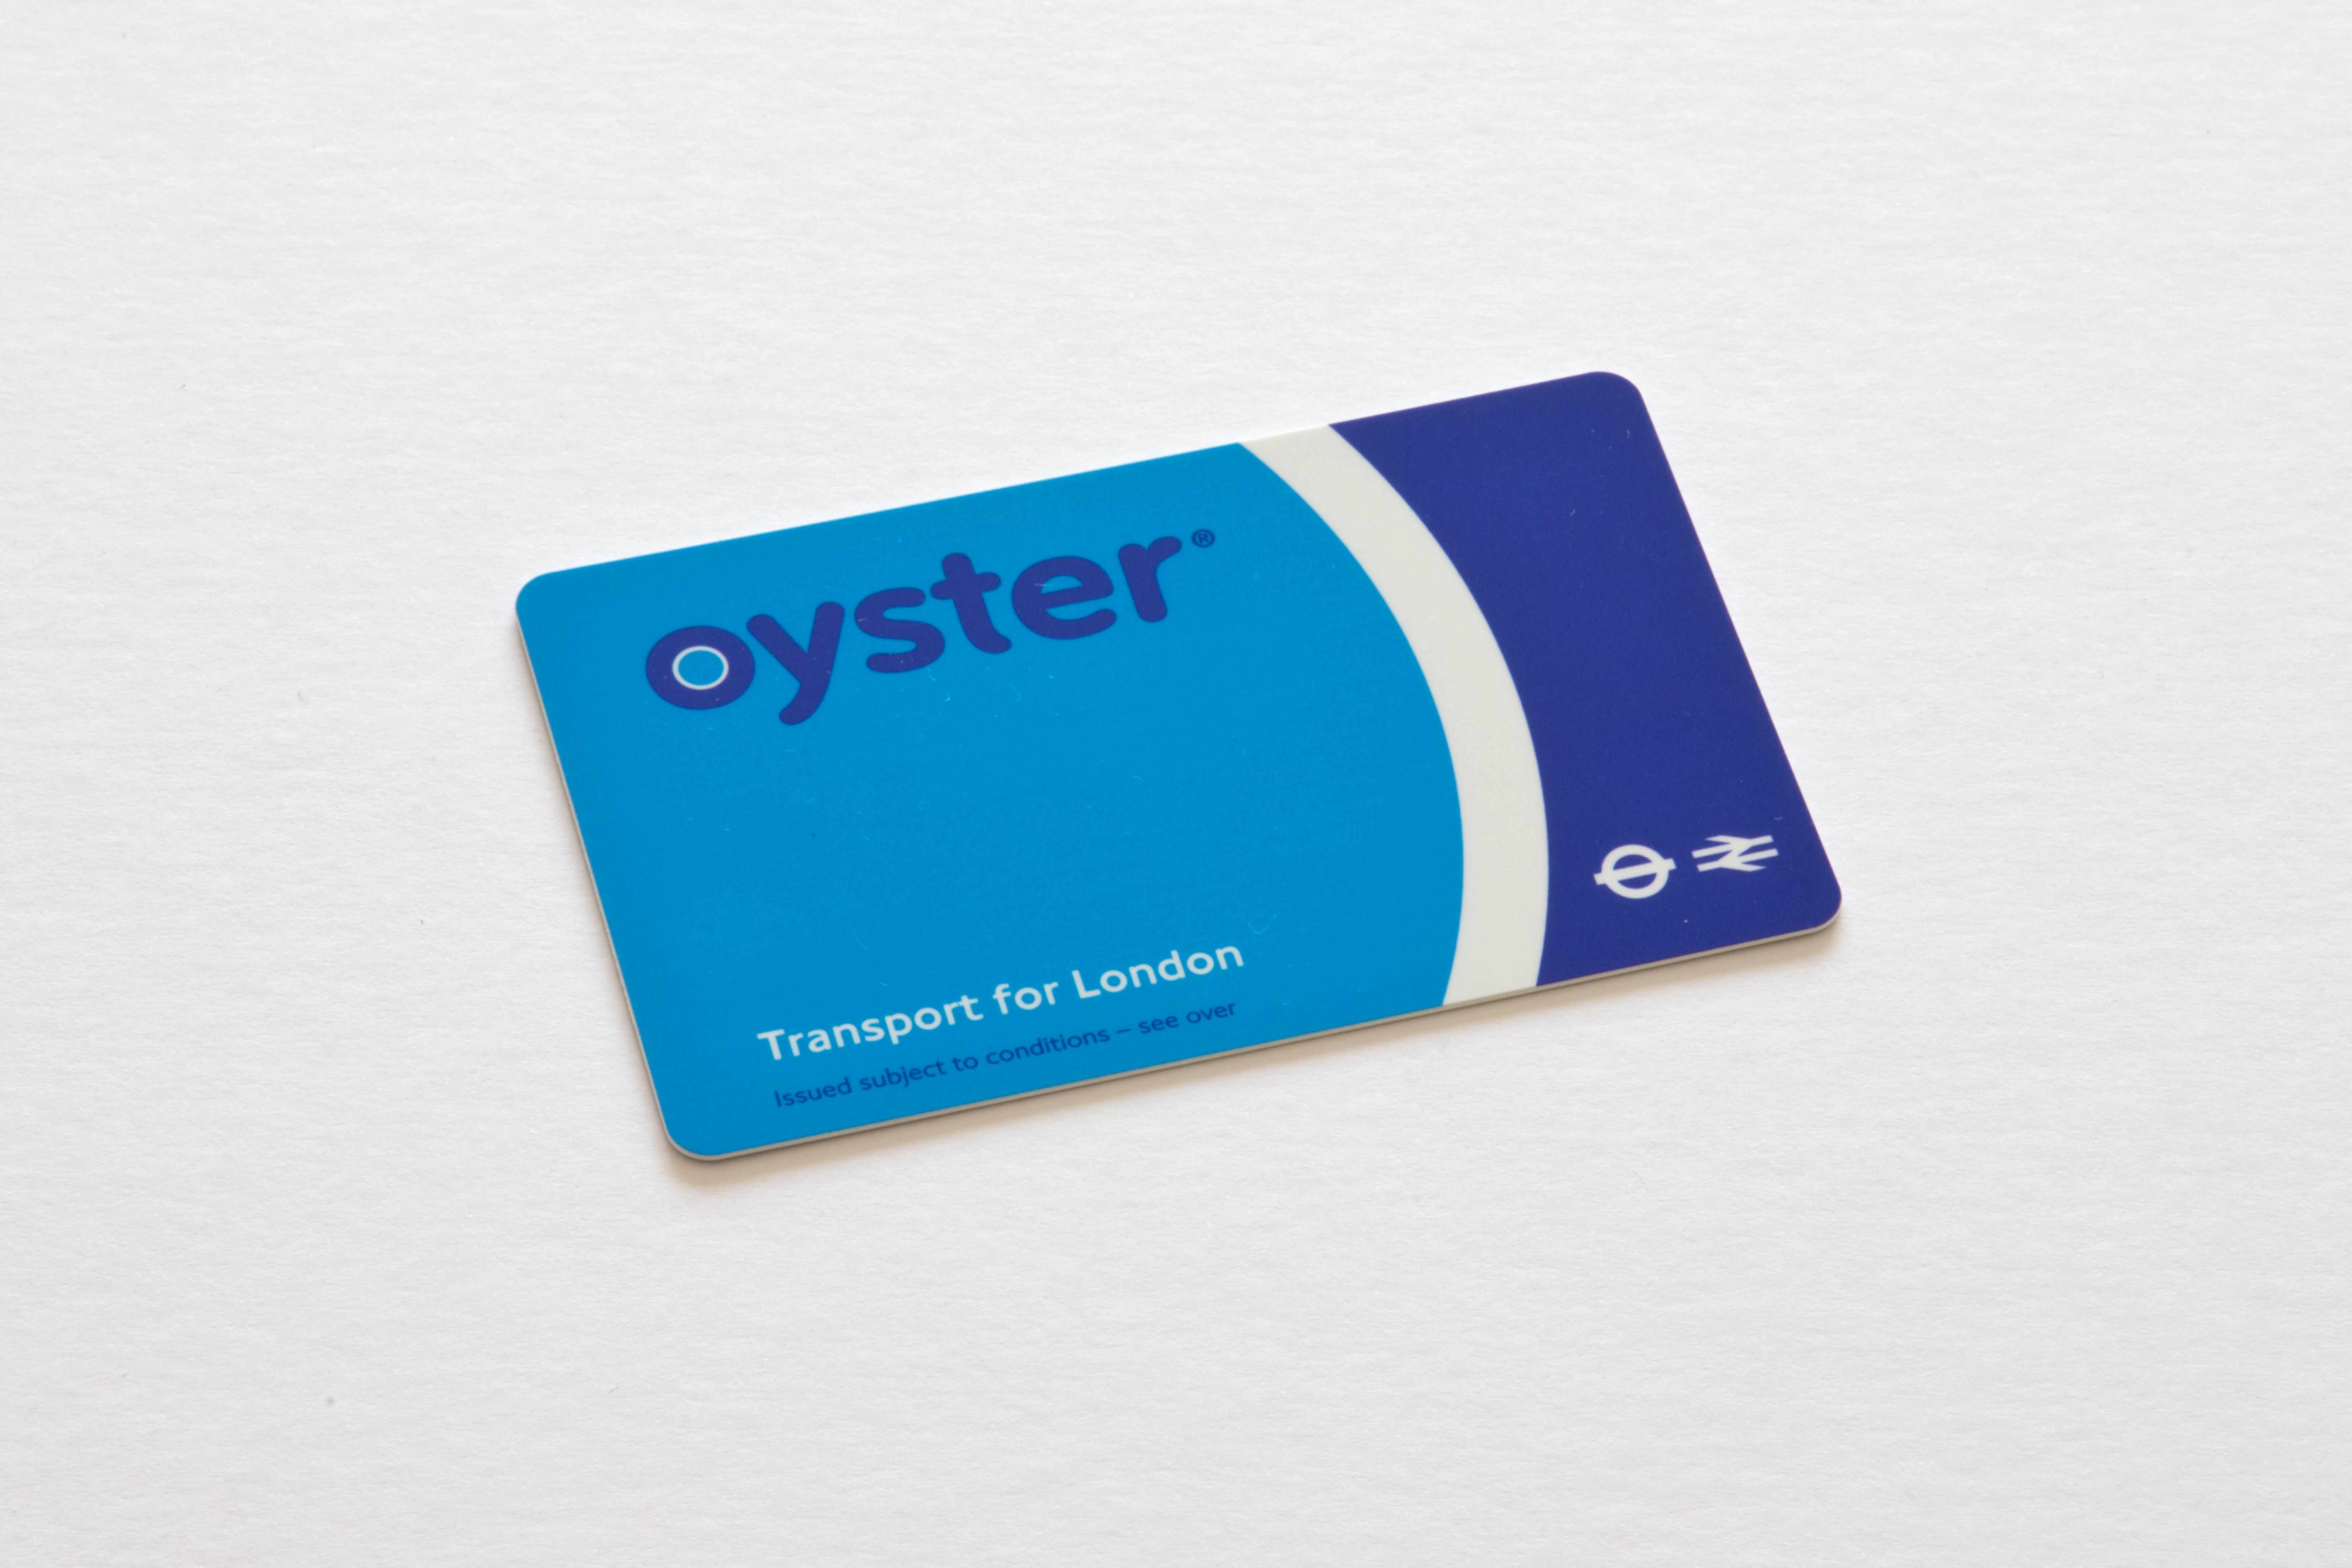 oyster transport for london card